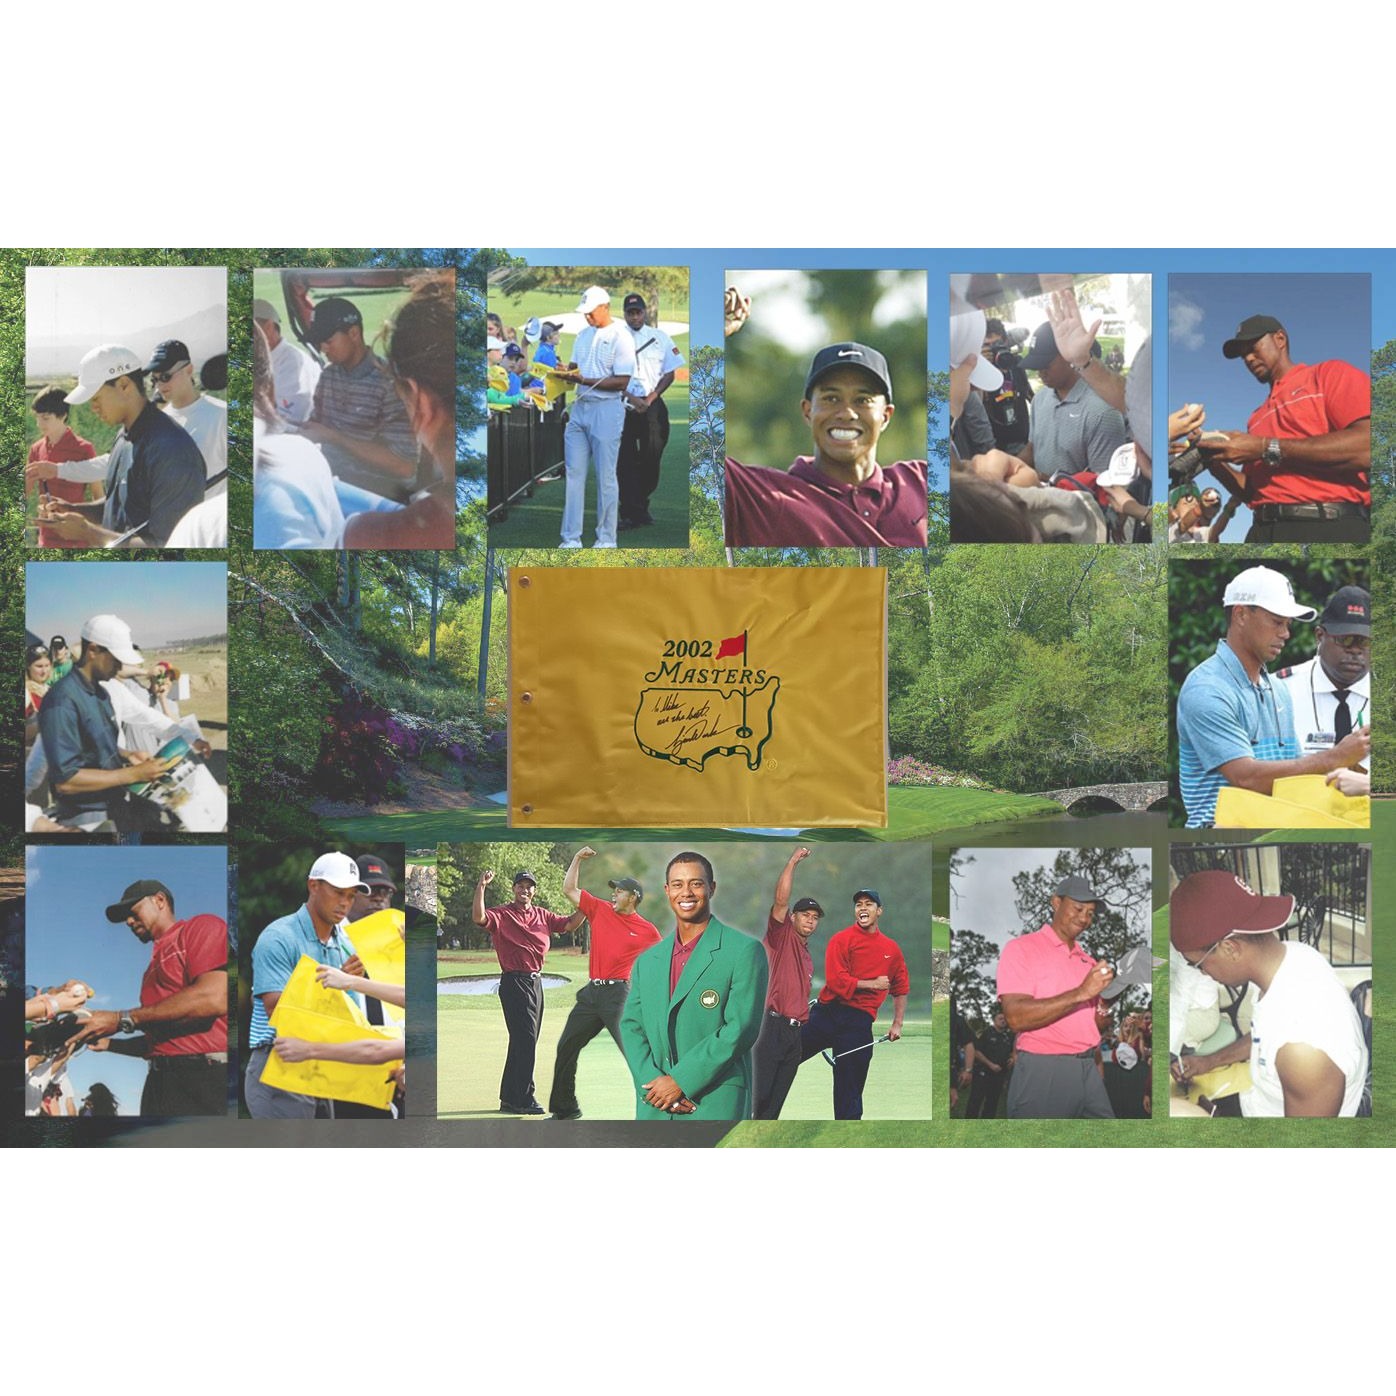 Tiger Woods "To Mike all the best" 2002 Masters Golf pin flag signed with proof